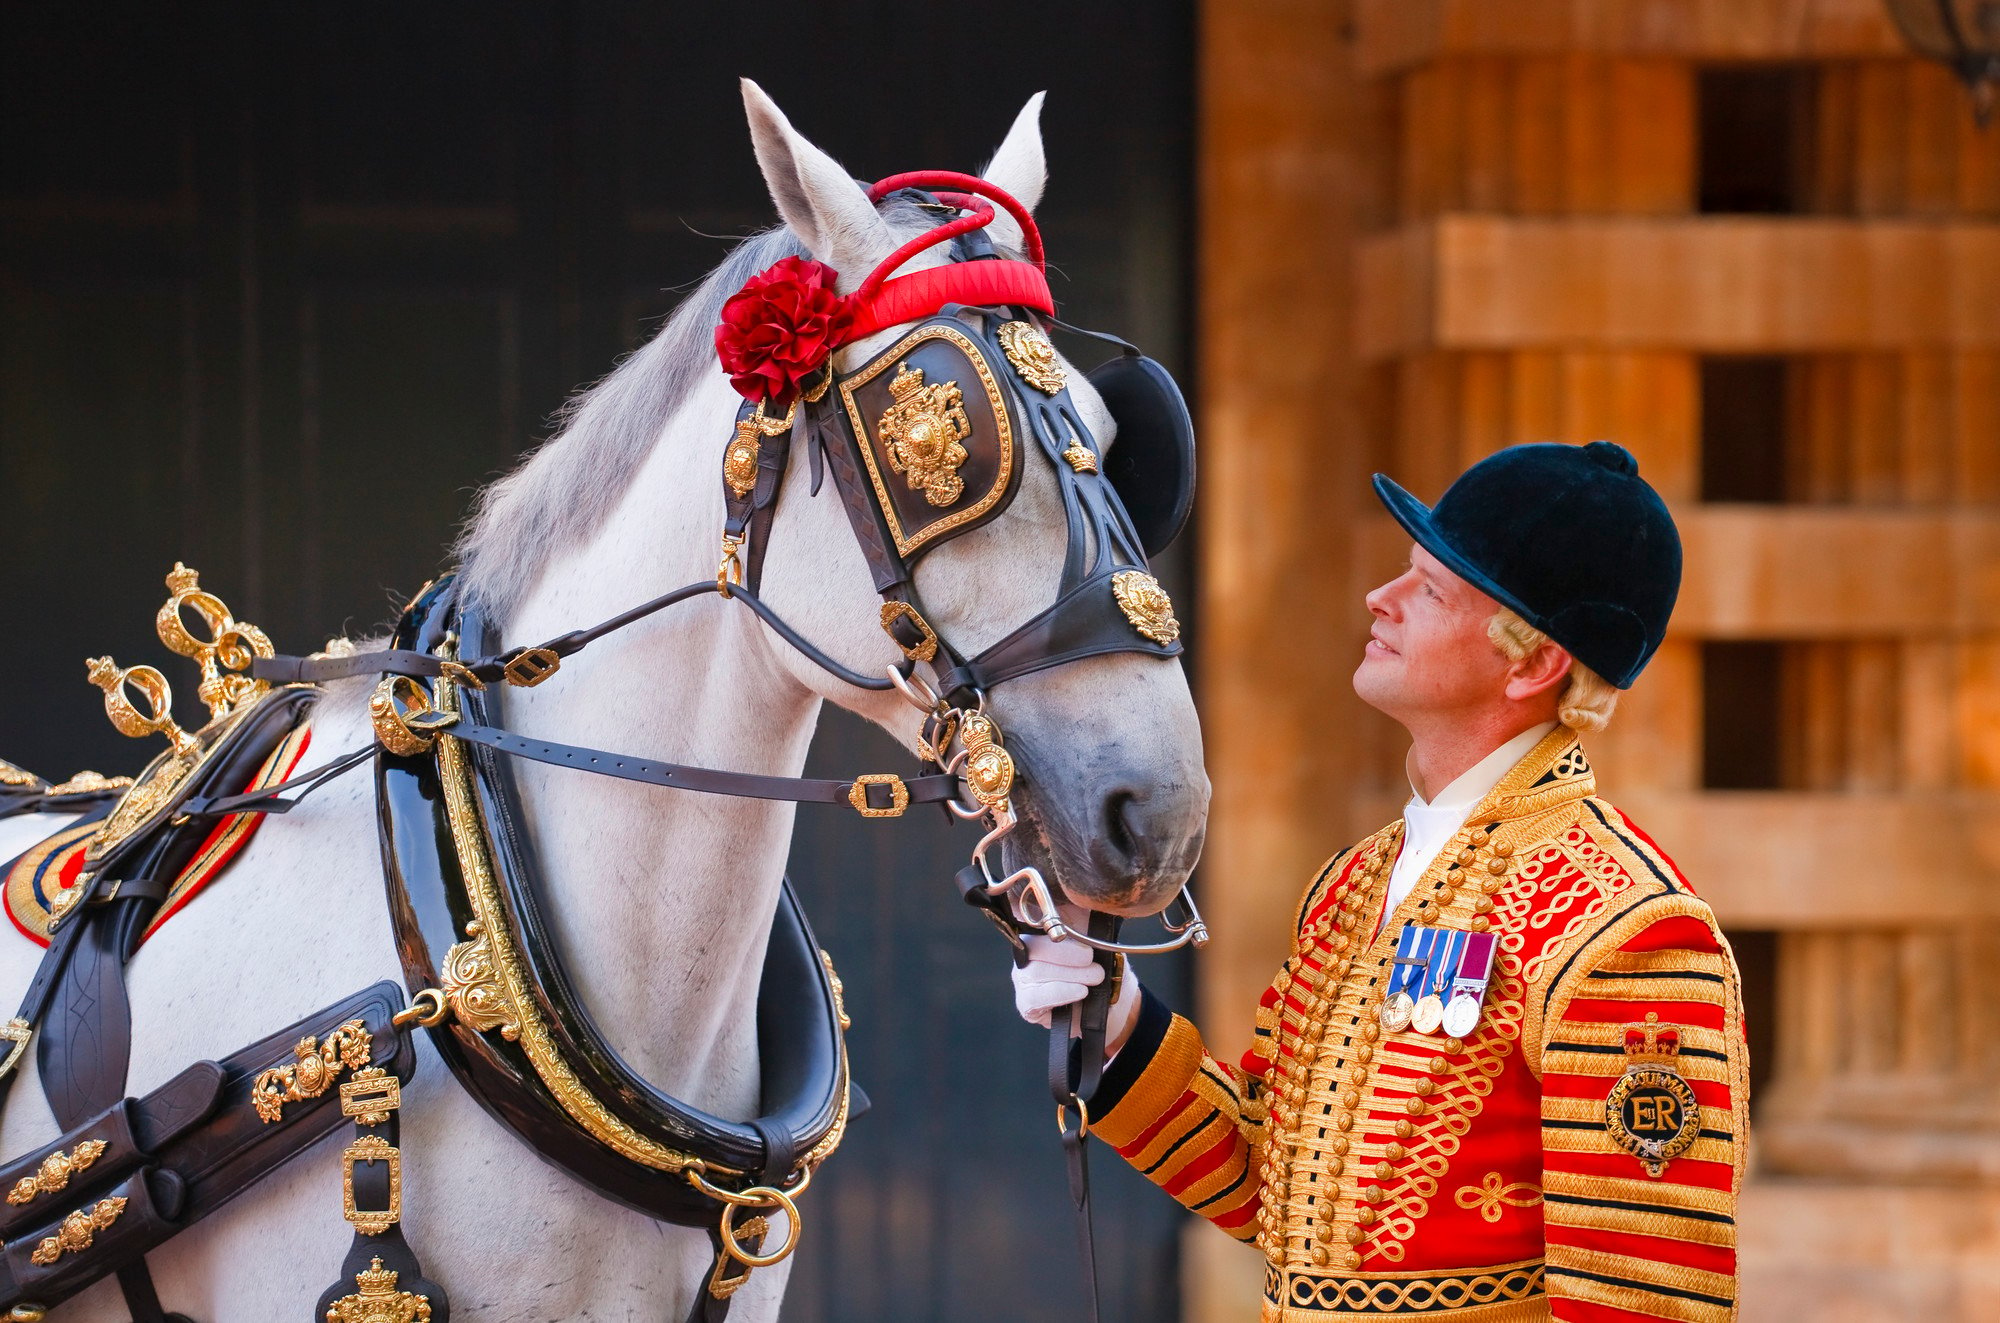 Horse dressed in Royal Mews finery with rider in uniform